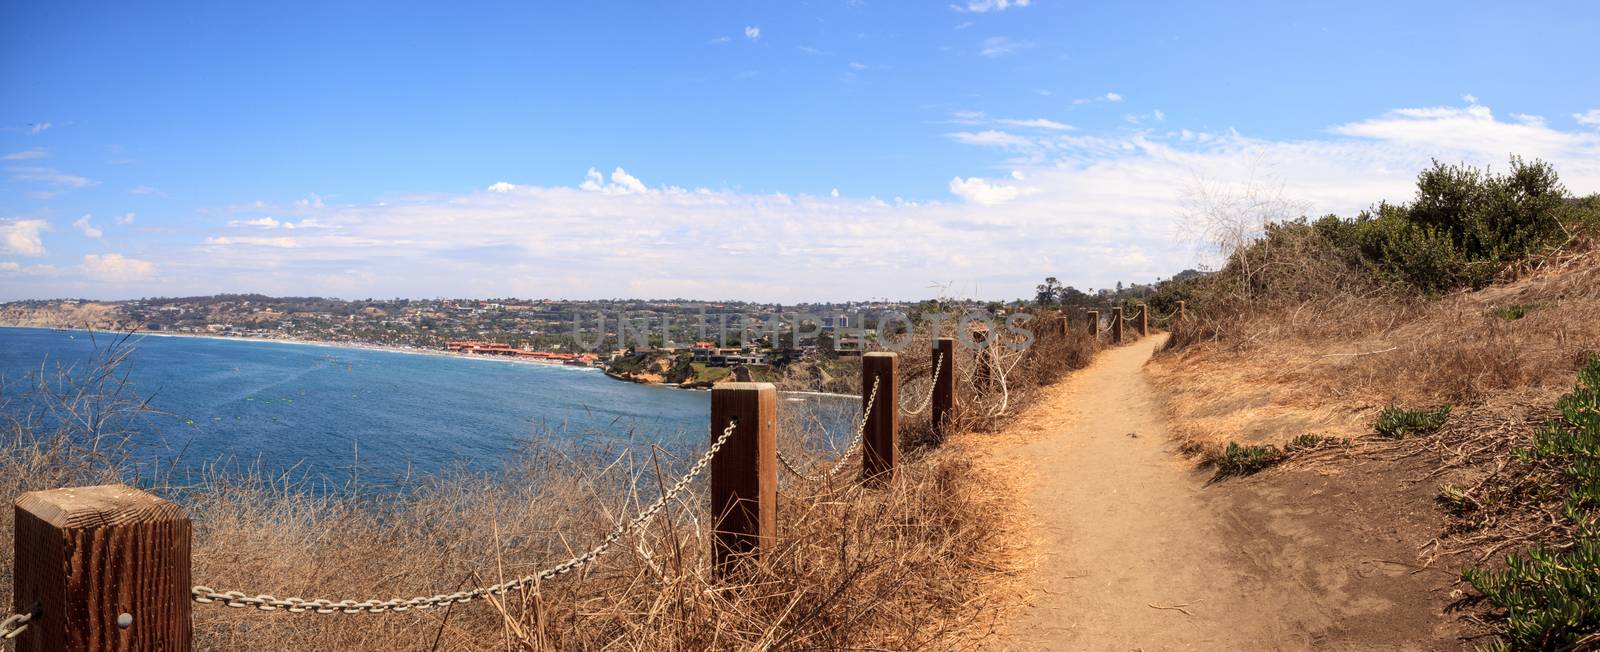 Hiking trails and benches above the coastal area of La Jolla Cove in Southern California in summer on a sunny day